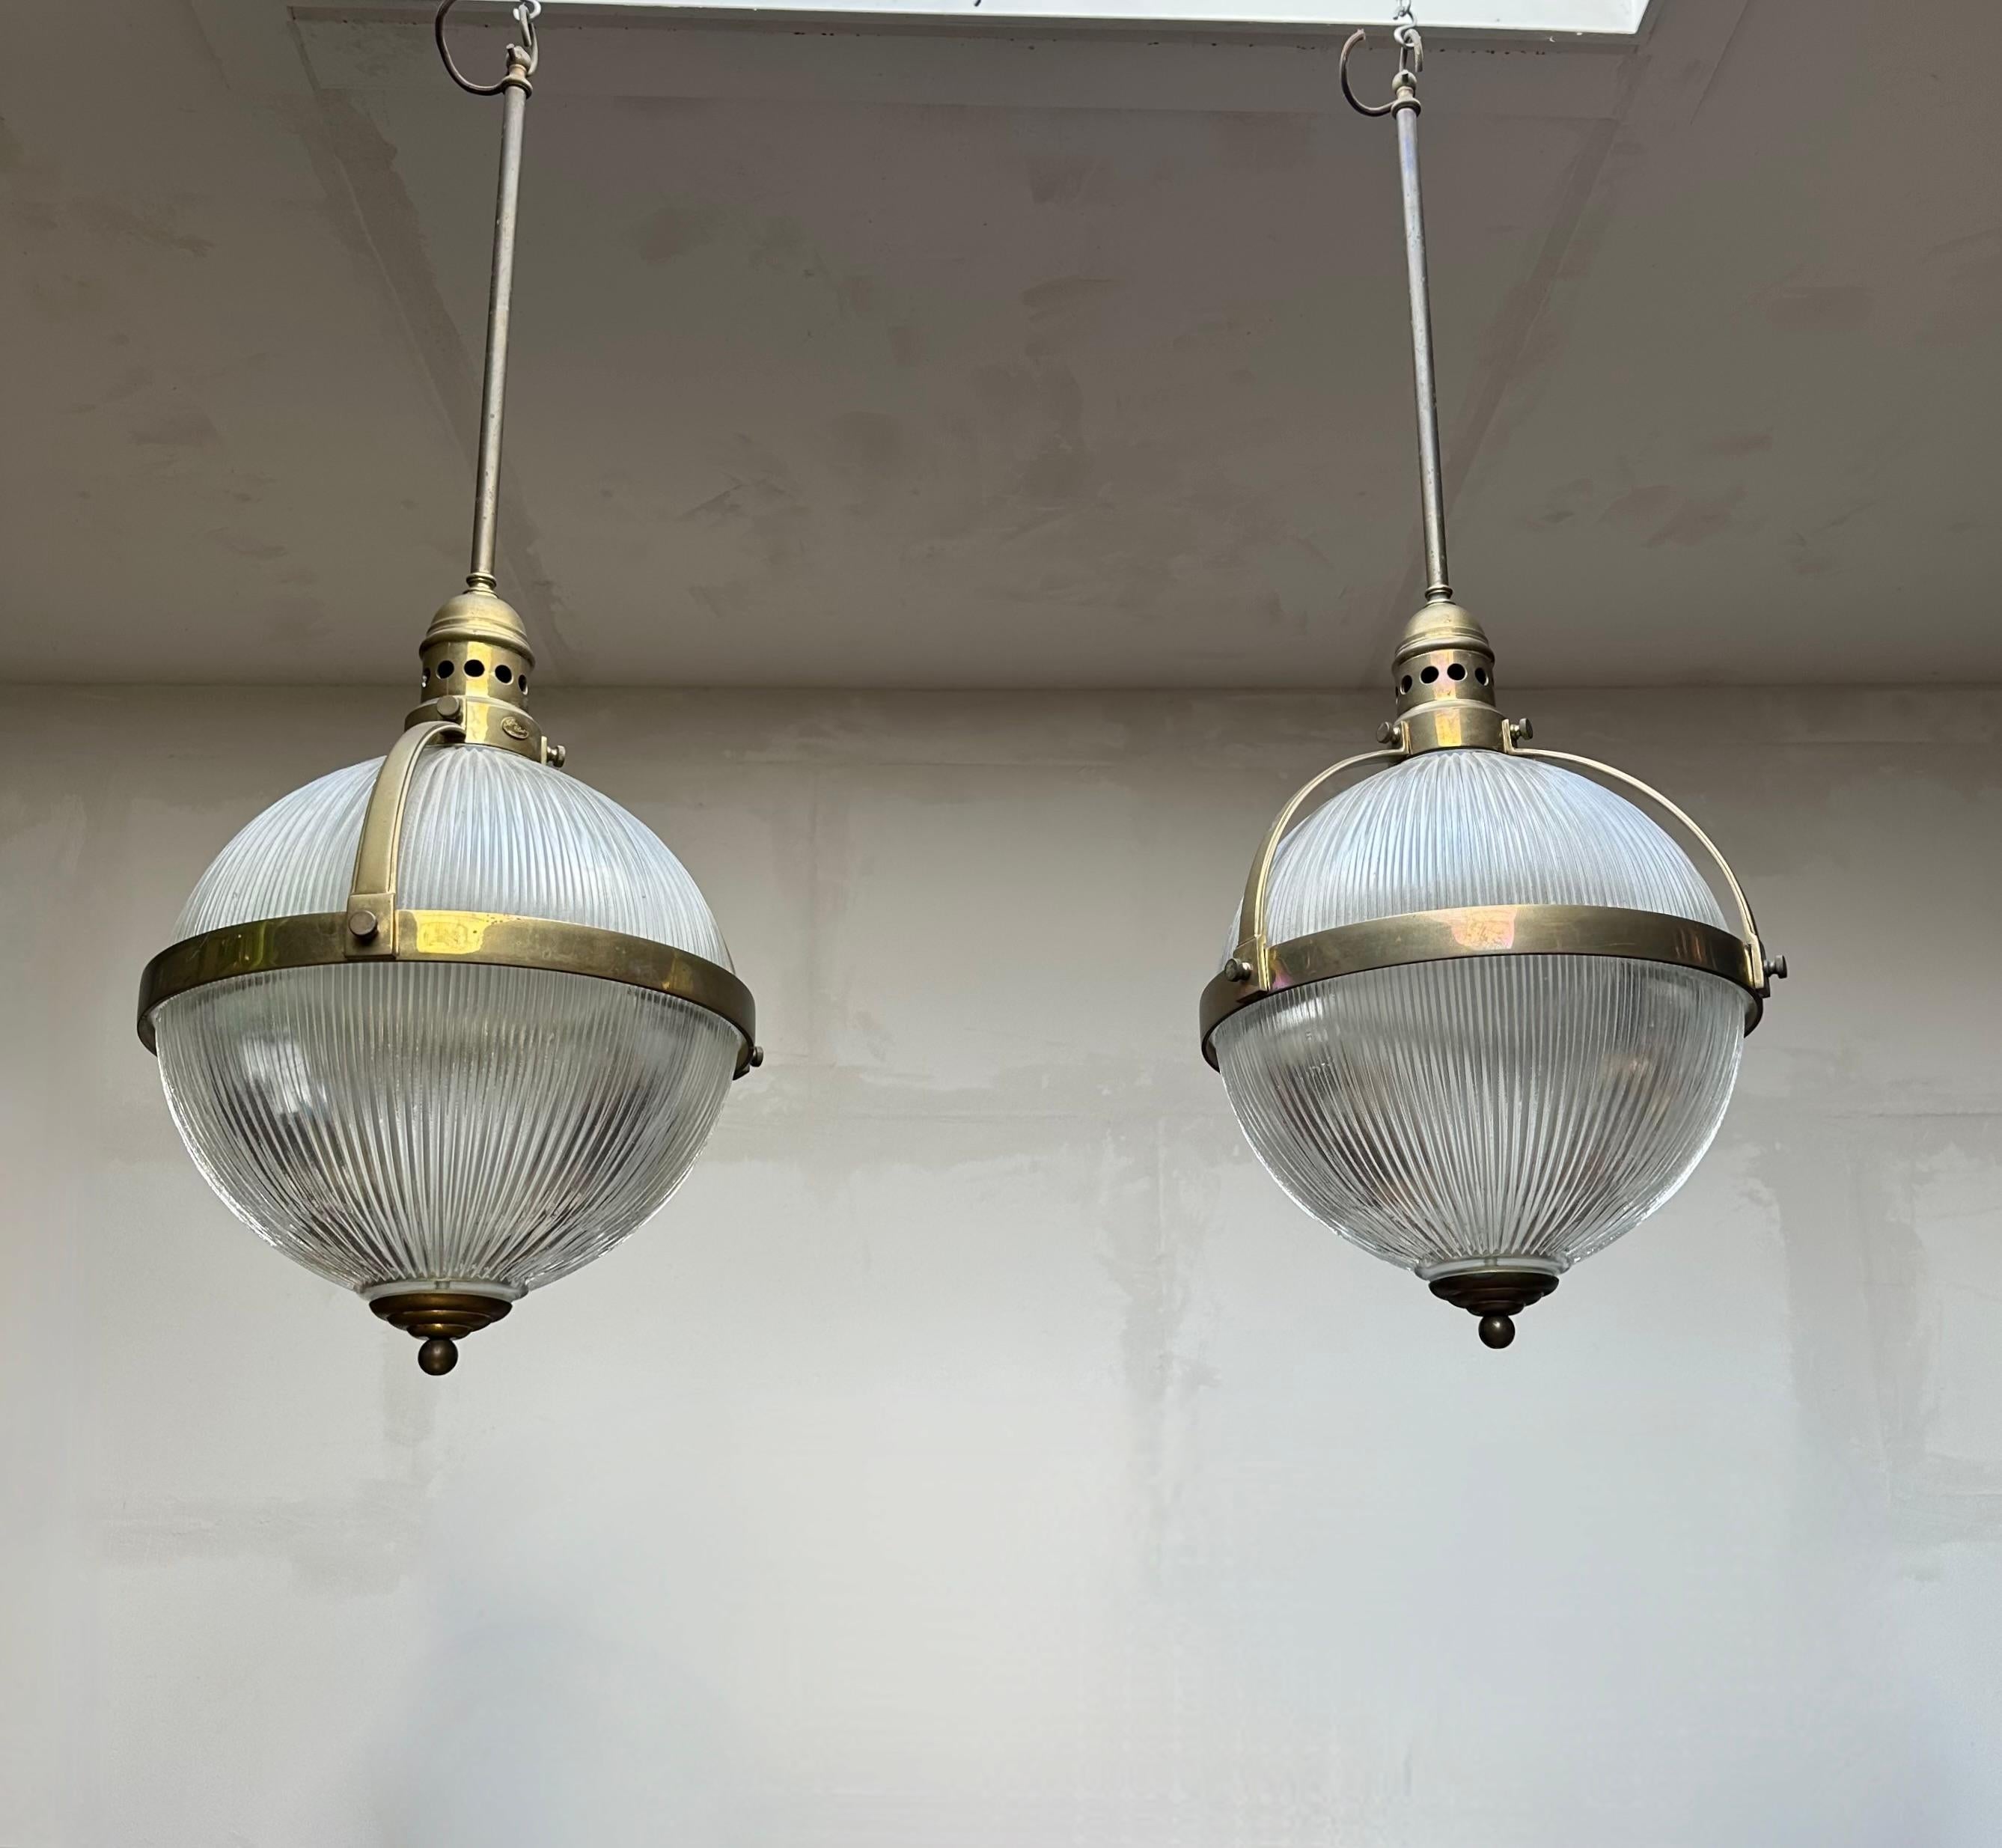 Extra large size and great shape pair of identical pendants / light fixtures.

If you are looking for a pair of beautiful and truly stylish pendants for a Midcentury, for an Art Deco or even for a contemporary interior then this pair could be your